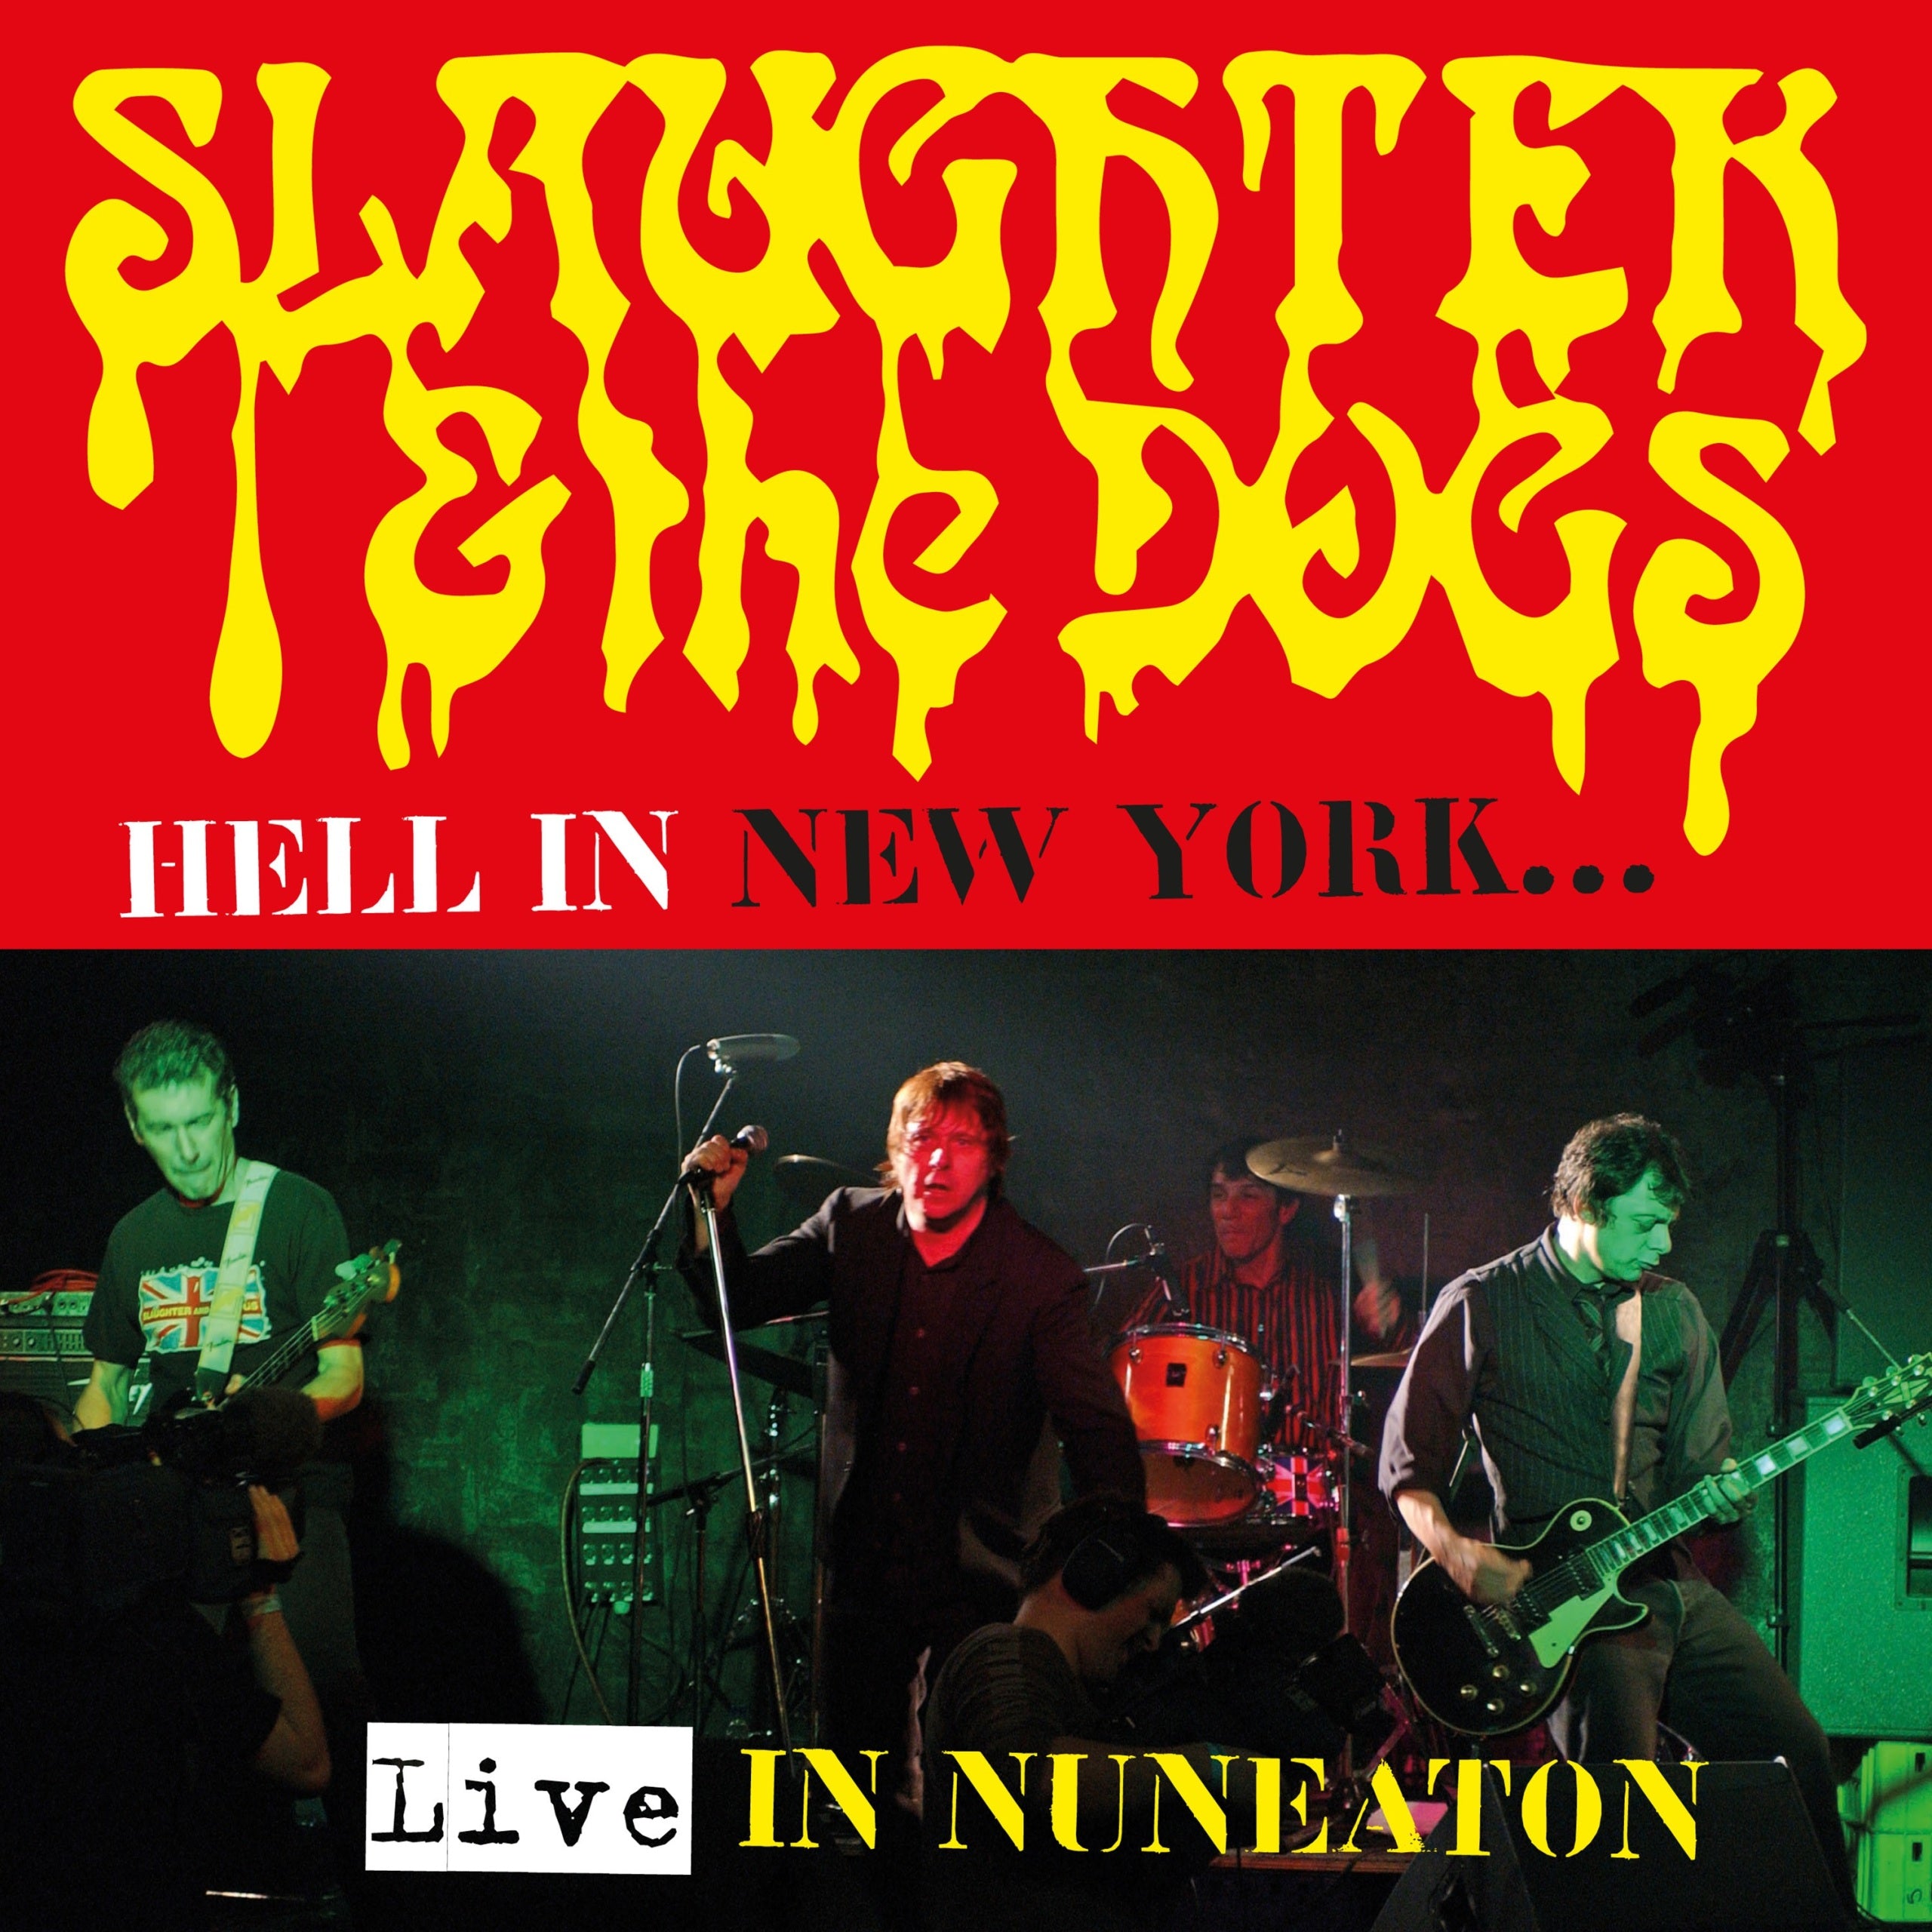 Slaughter & The Dogs - Hell In New York Live In Nuneaton - CD+DVD Album - Secret Records Limited